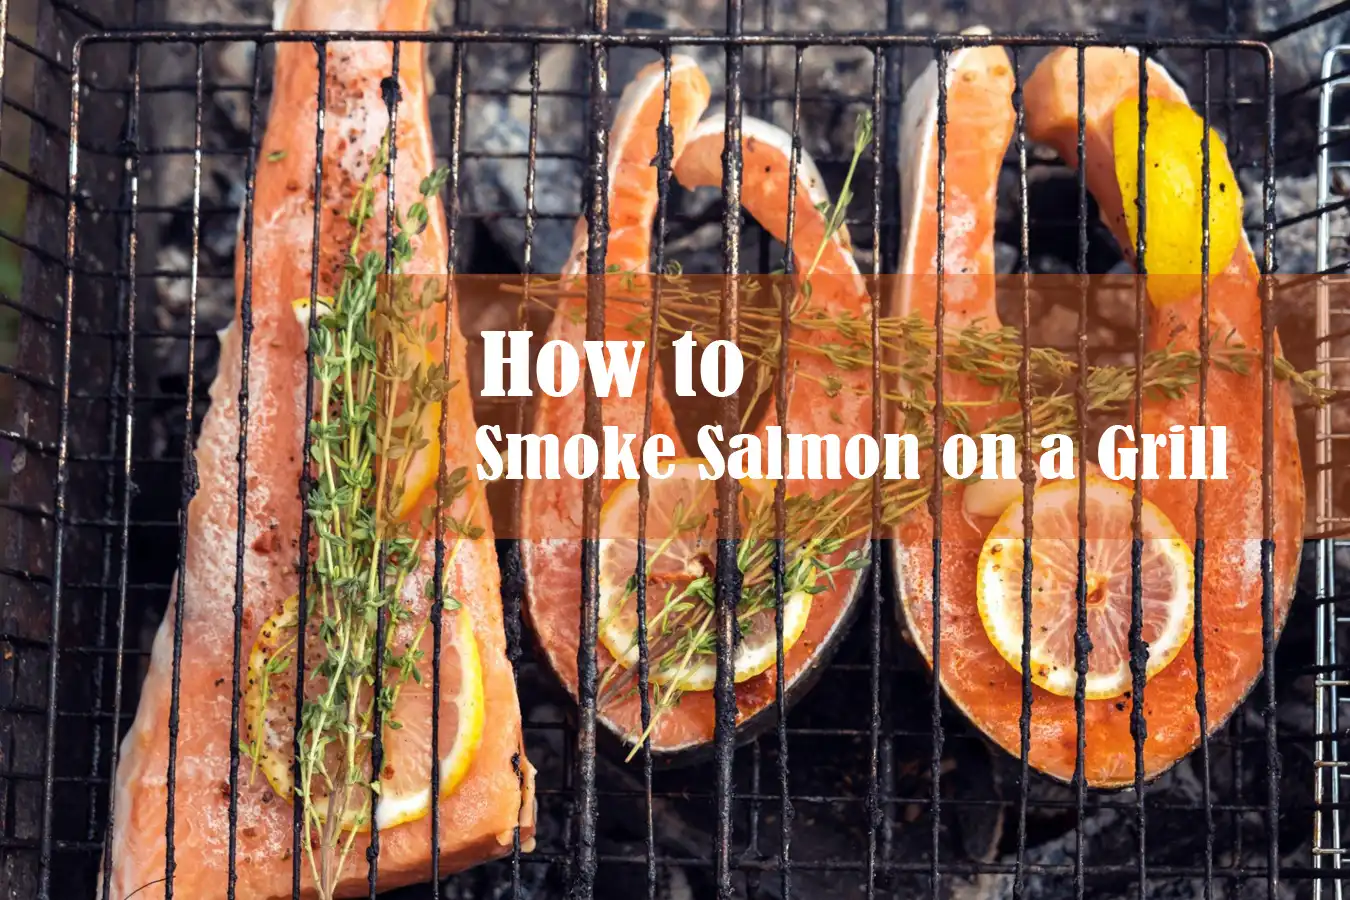 How to Smoke Salmon on a Grill